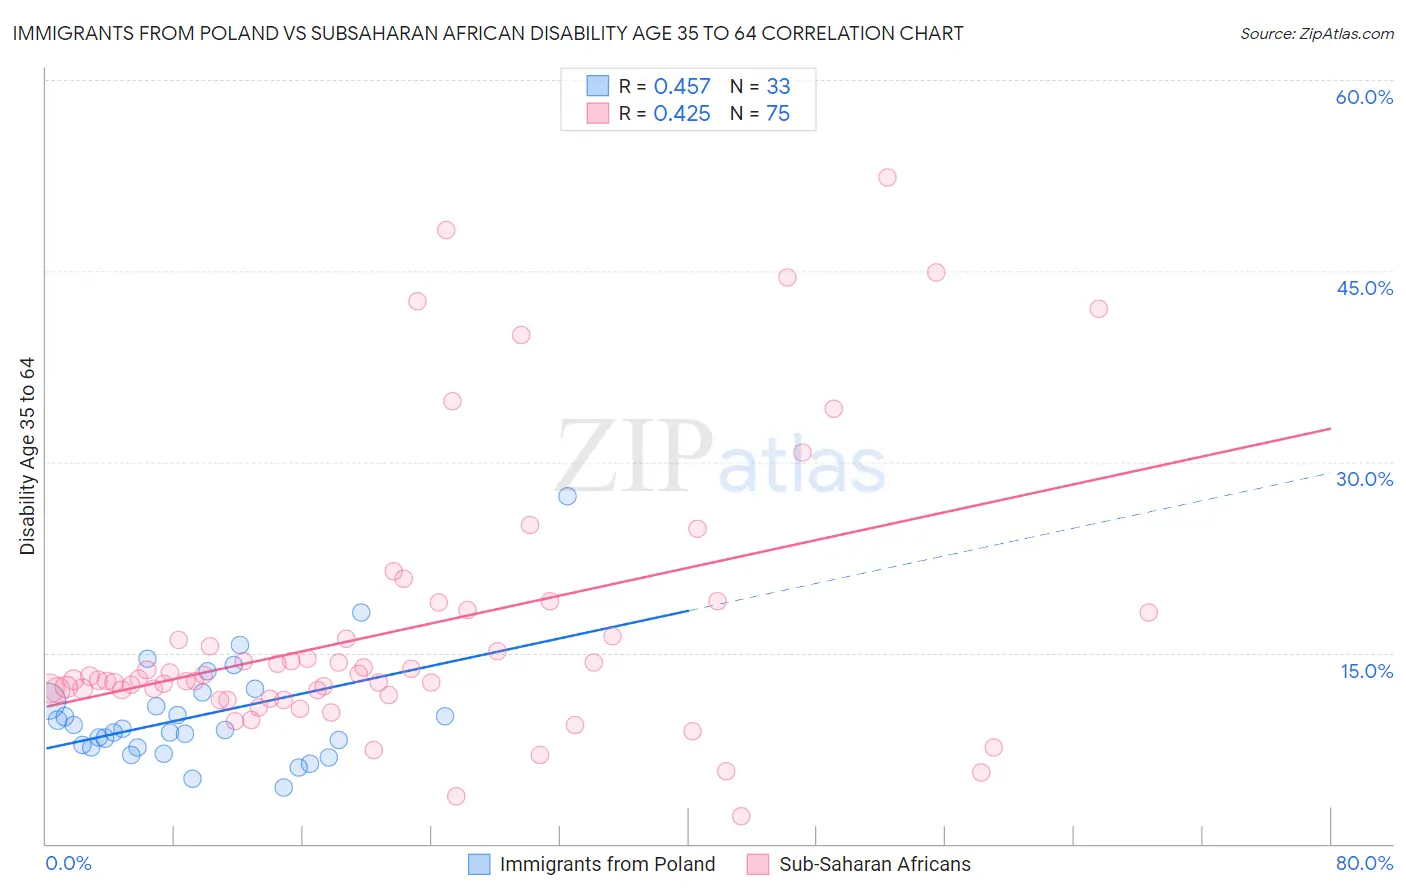 Immigrants from Poland vs Subsaharan African Disability Age 35 to 64